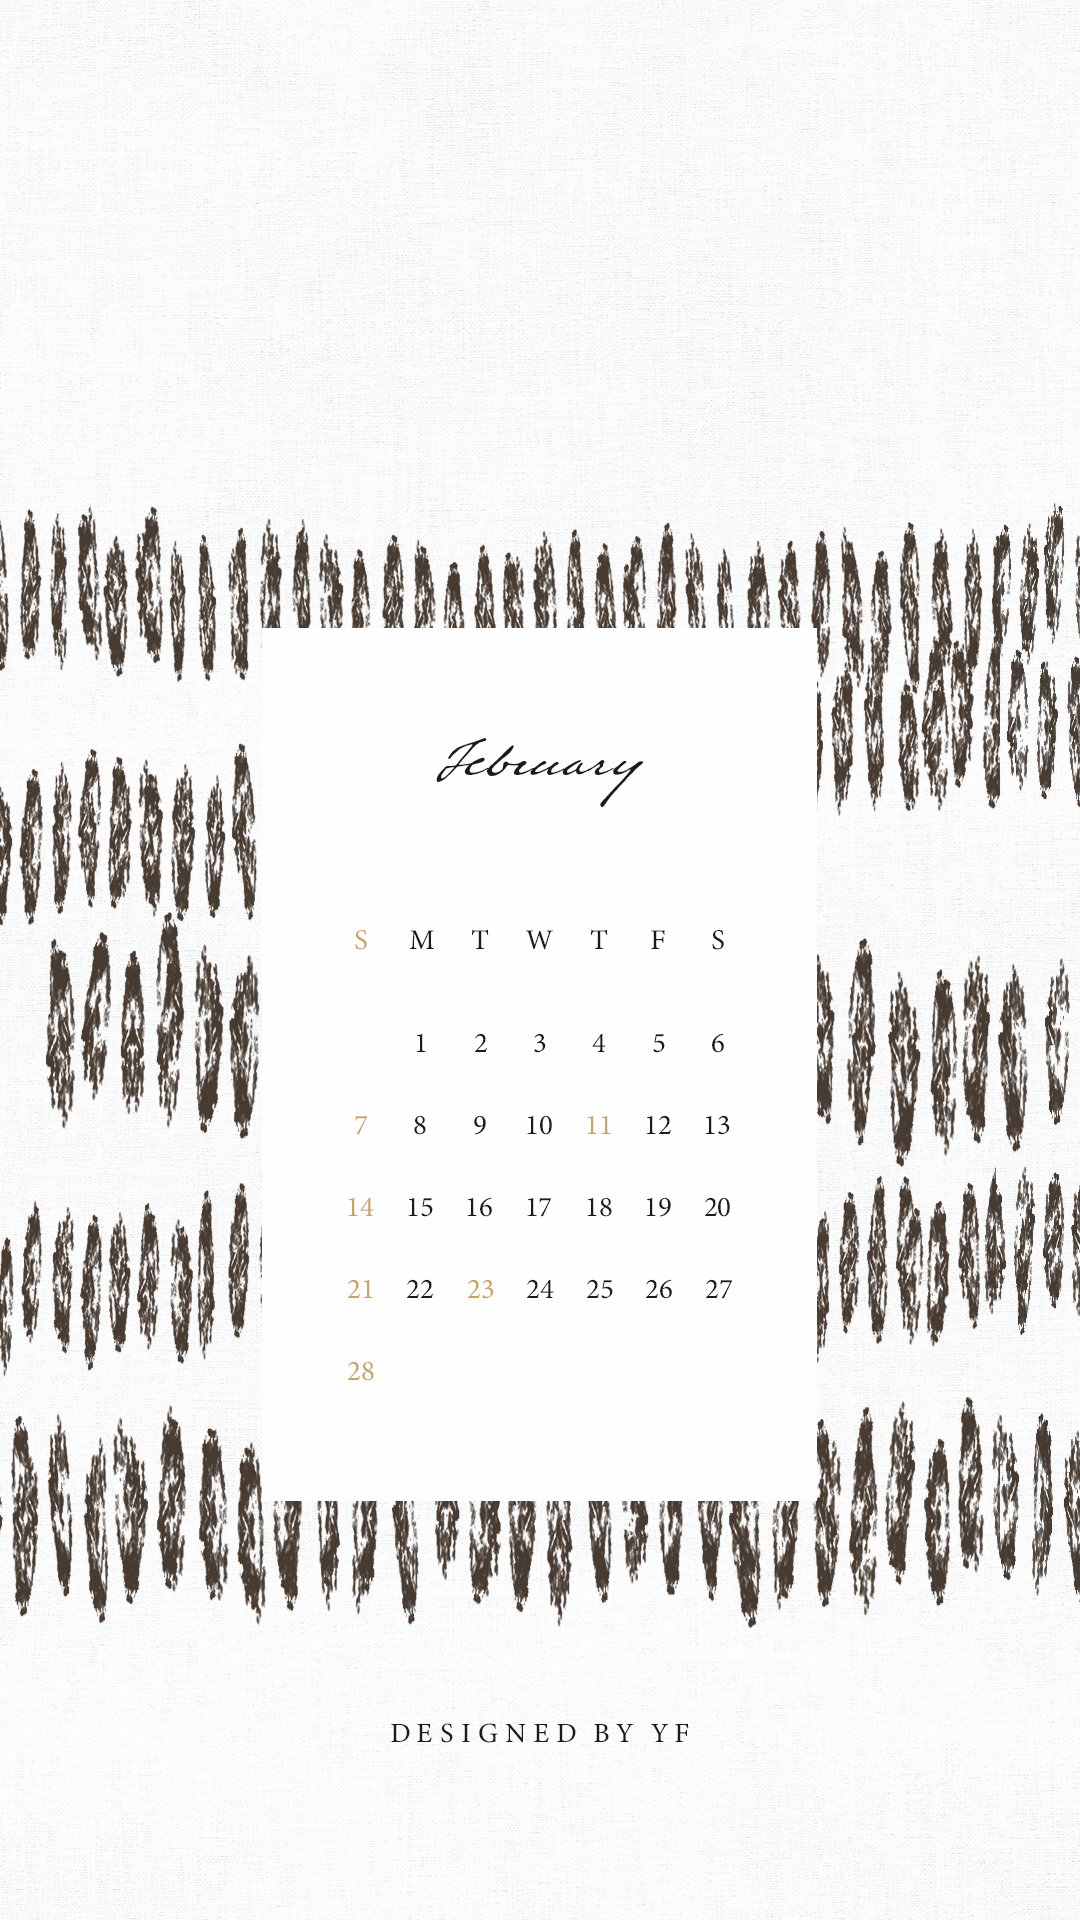 February 21 Calendar Wallpaper For The Iphone Designed By Yf